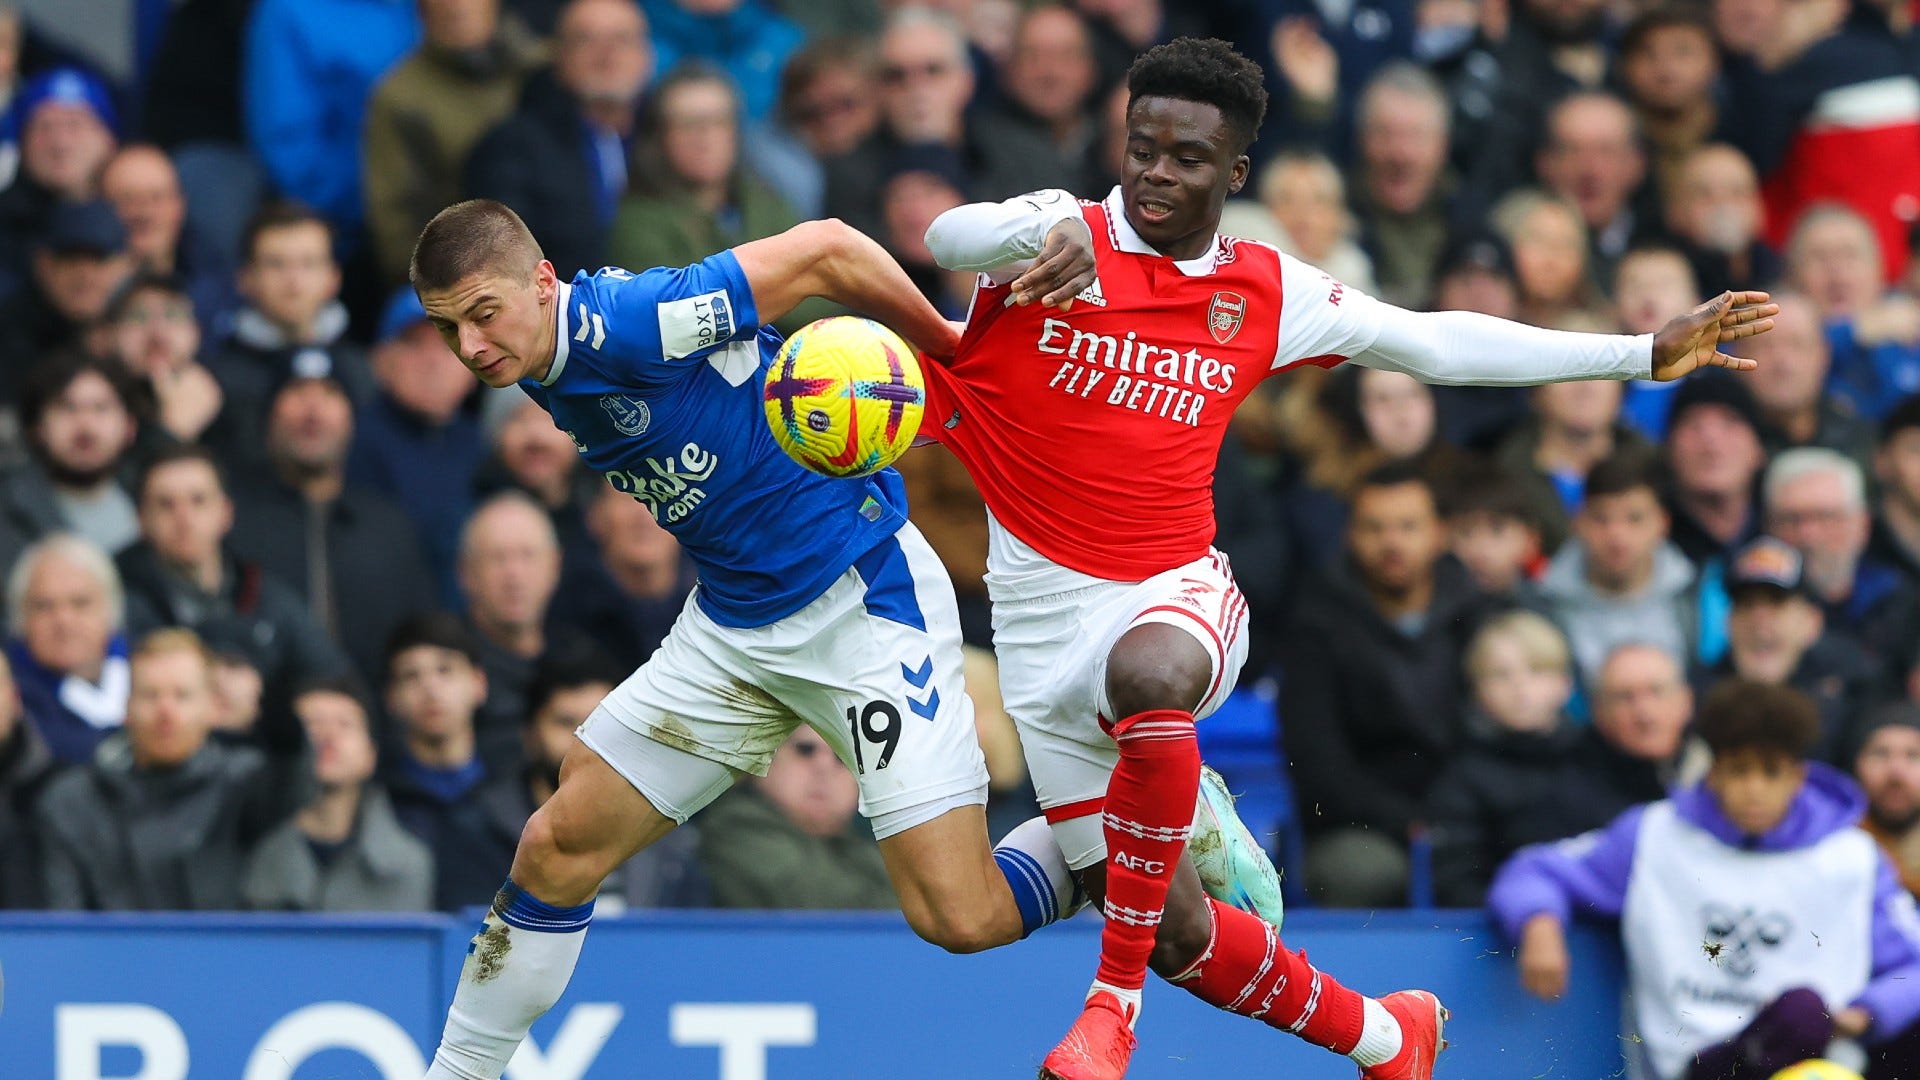 Arsenal vs Everton Live stream, TV channel, kick-off time and where to watch Goal US